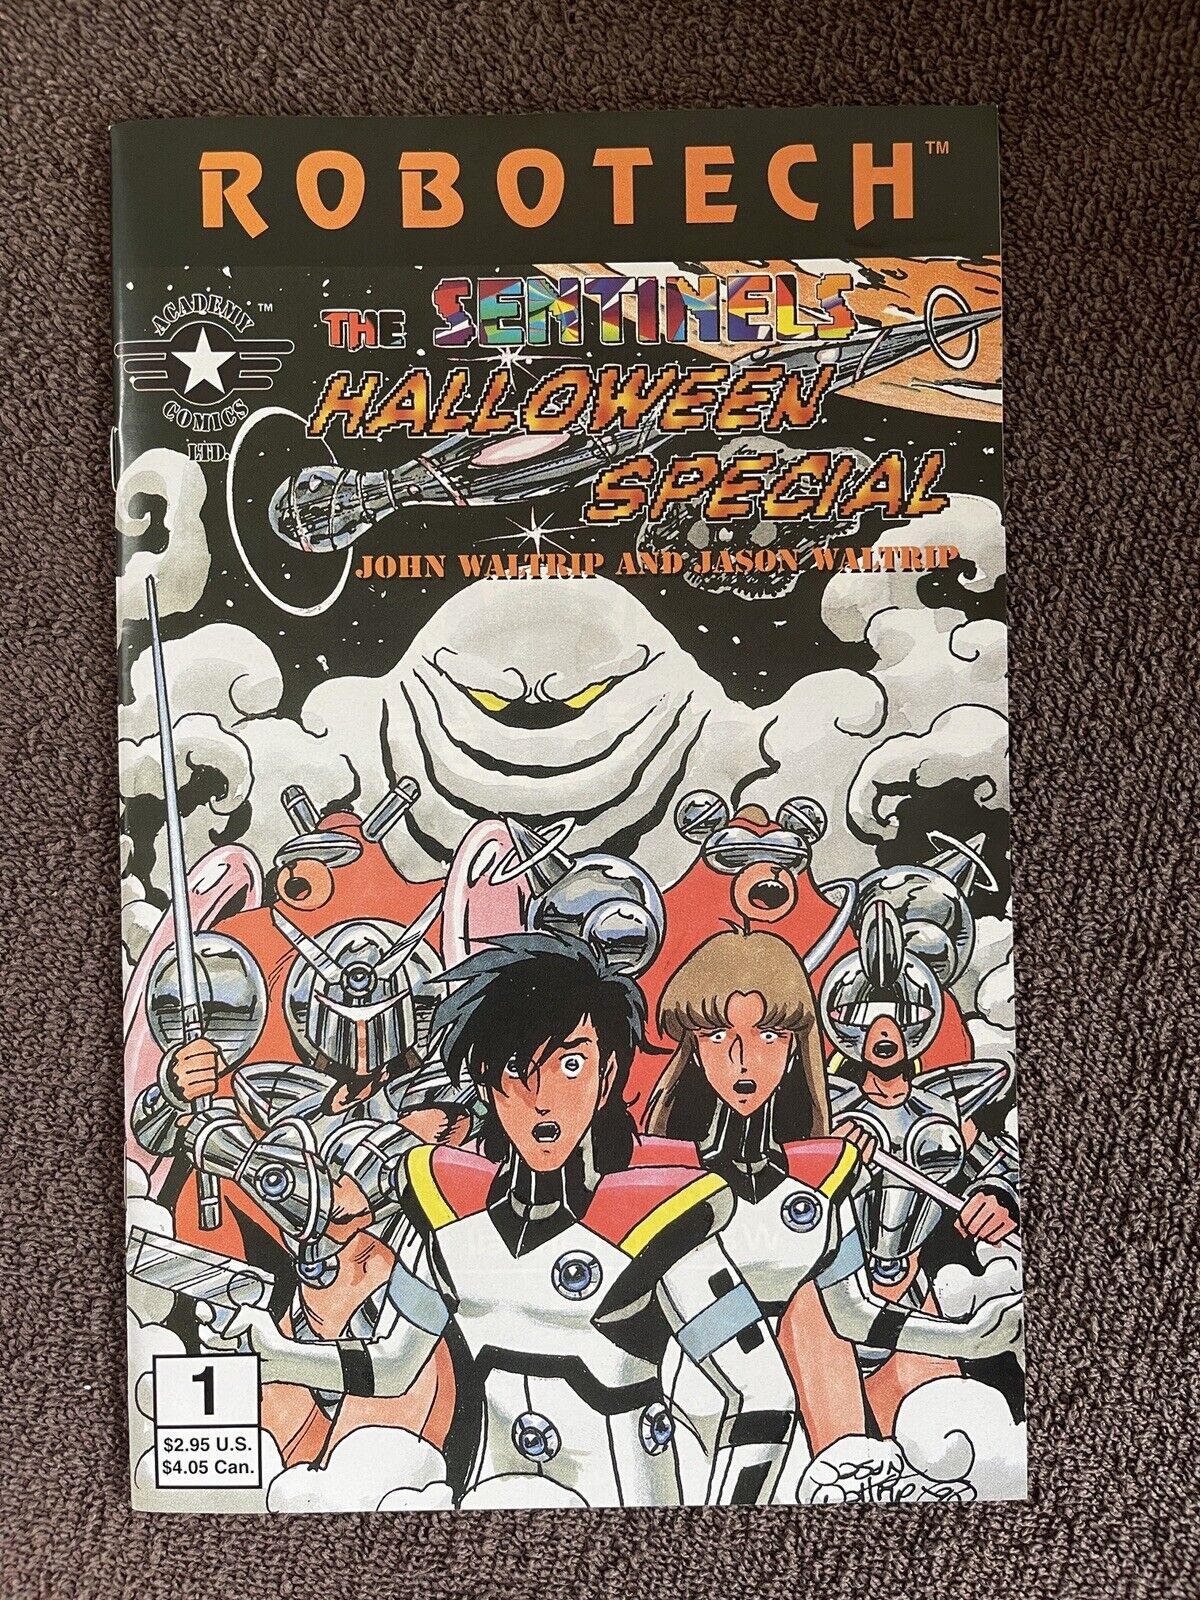 Robotech: The Sentinels HALLOWEEN SPECIAL #1 (Academy, 1996)